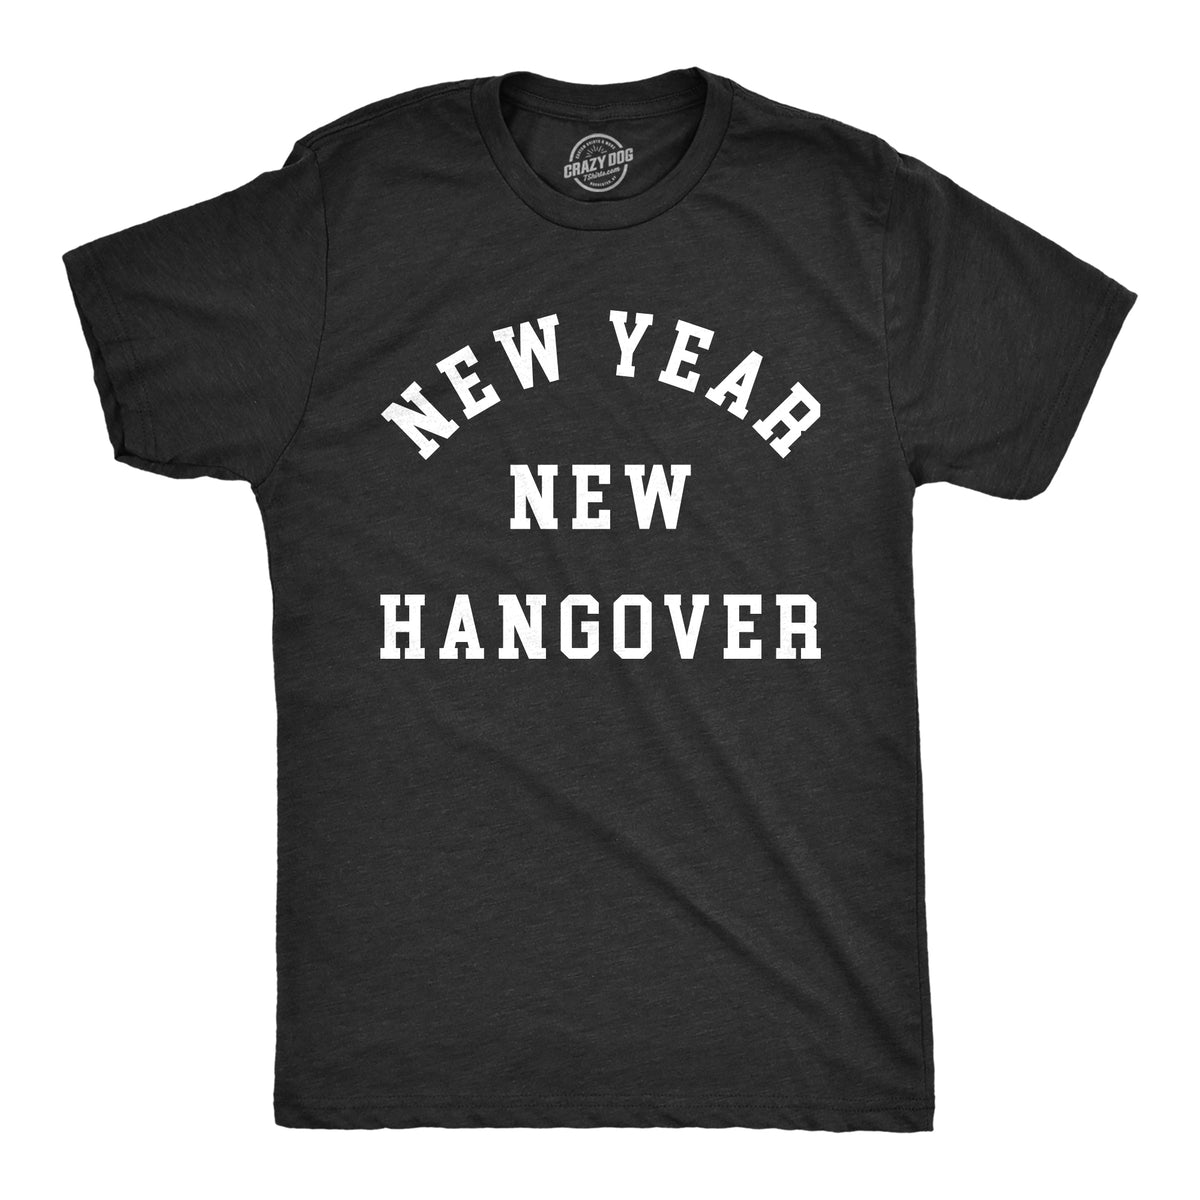 Funny Heather Black - NEWHANGOVER New Year New Hangover Mens T Shirt Nerdy New Years Drinking Tee